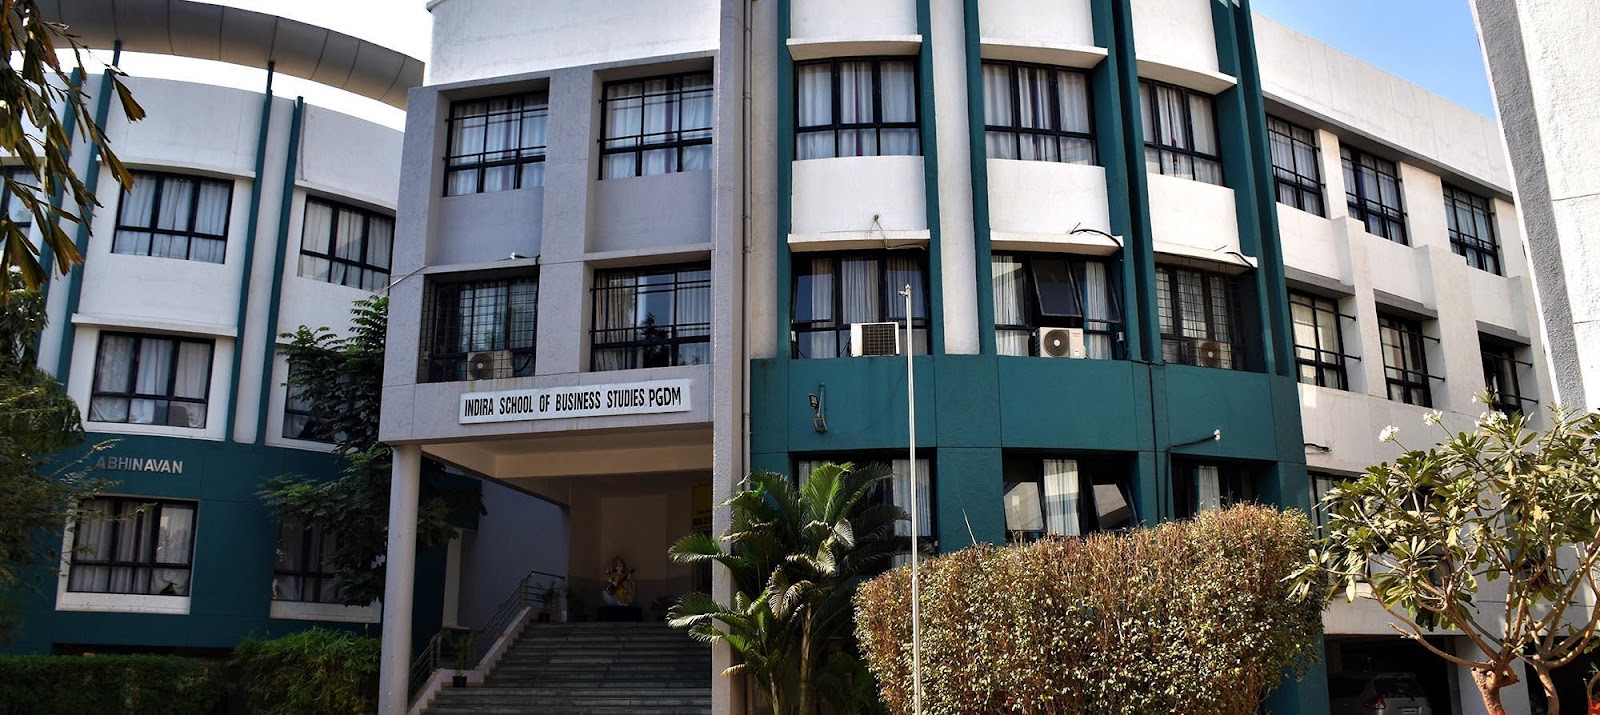 Indira School of Business Studies is a well known institute of Business Studies.